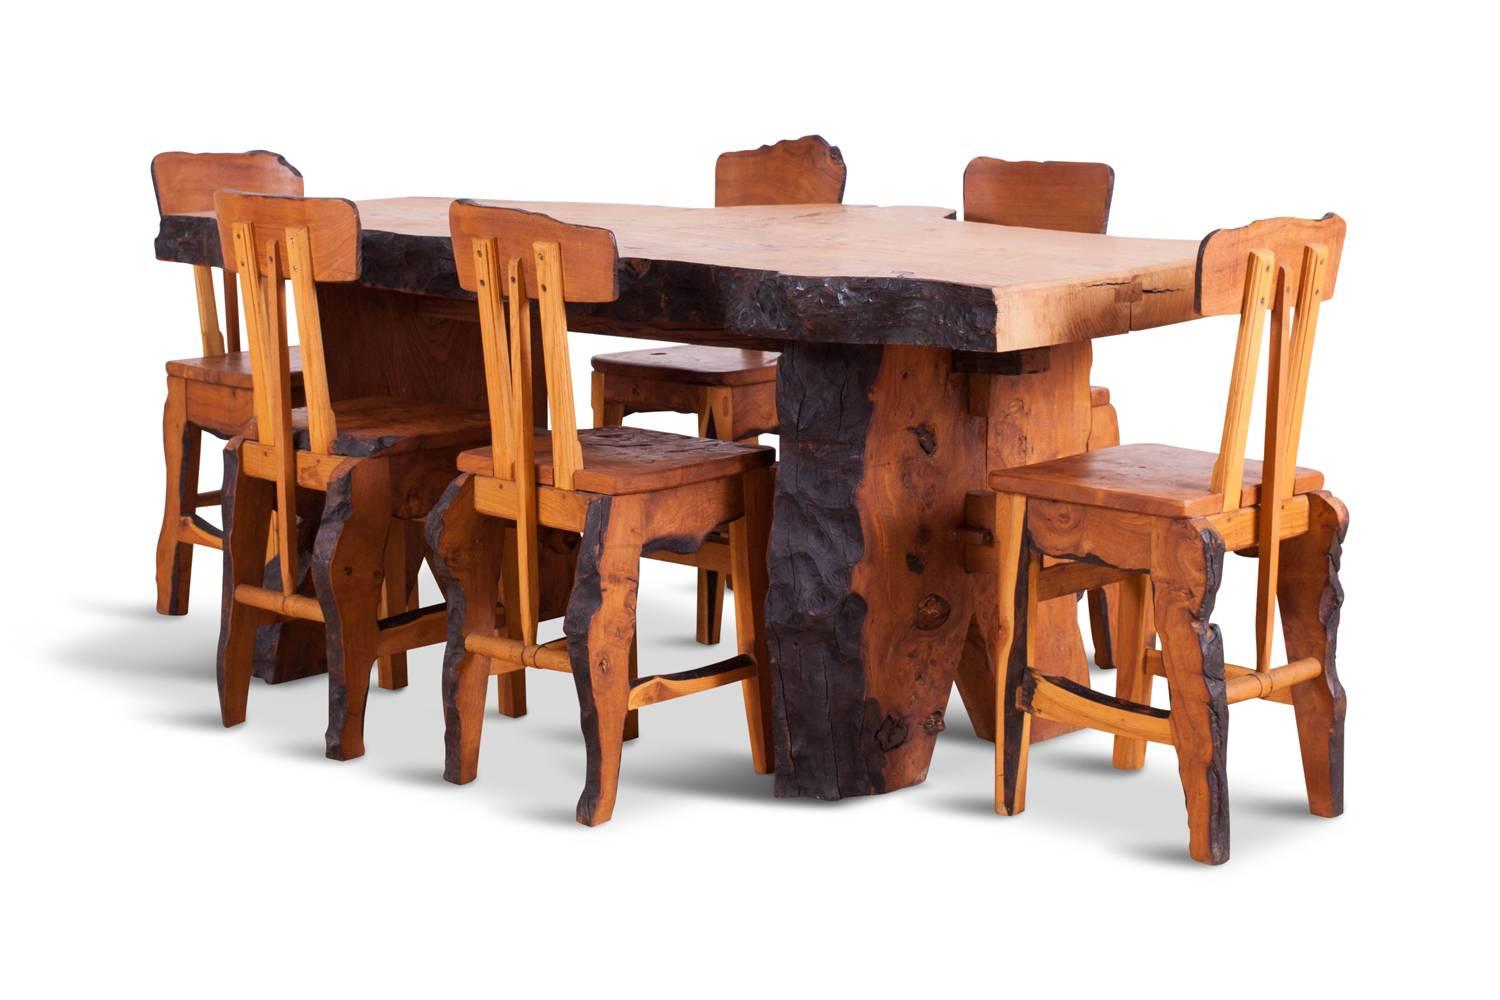 Unique dining suite in French elm (extinct)
matching table and chairs custom designed in an Atelier Français in the 1960s
Artisanal character gives a very personal feel and soul to your interior.
An ideal set for an eclectic interior.
Measures: